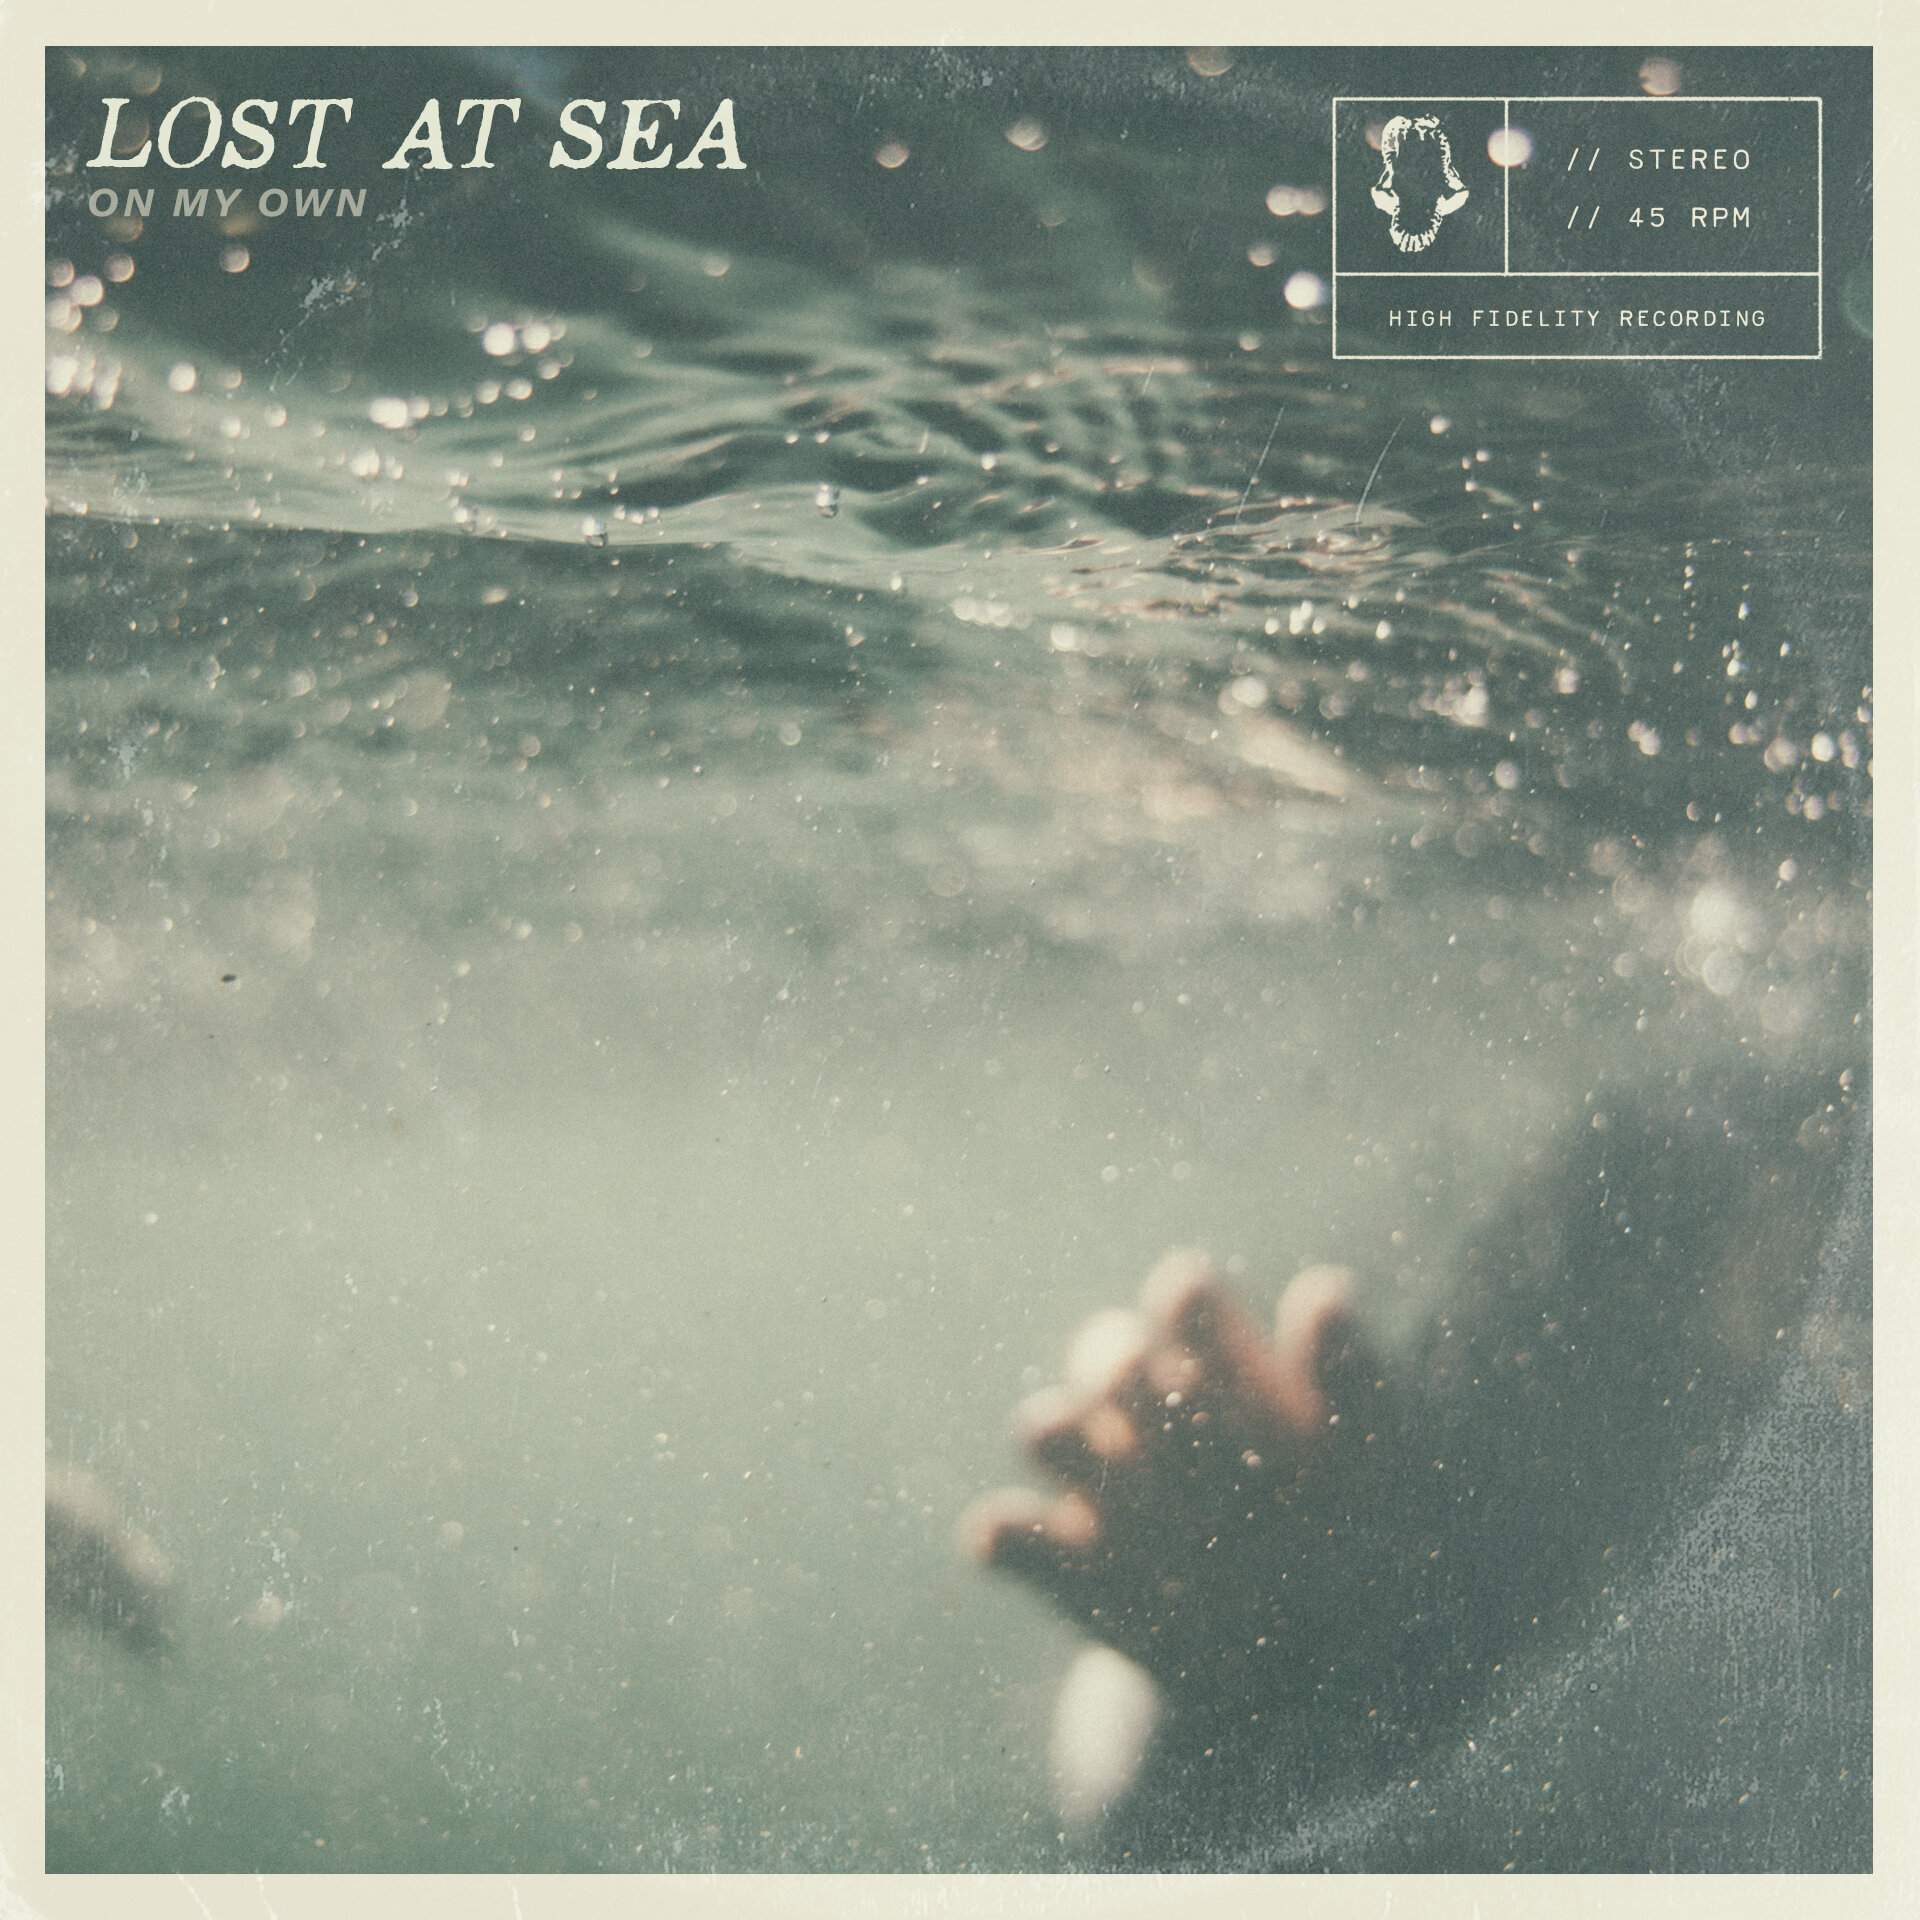 Lost At Sea - "On My Own"